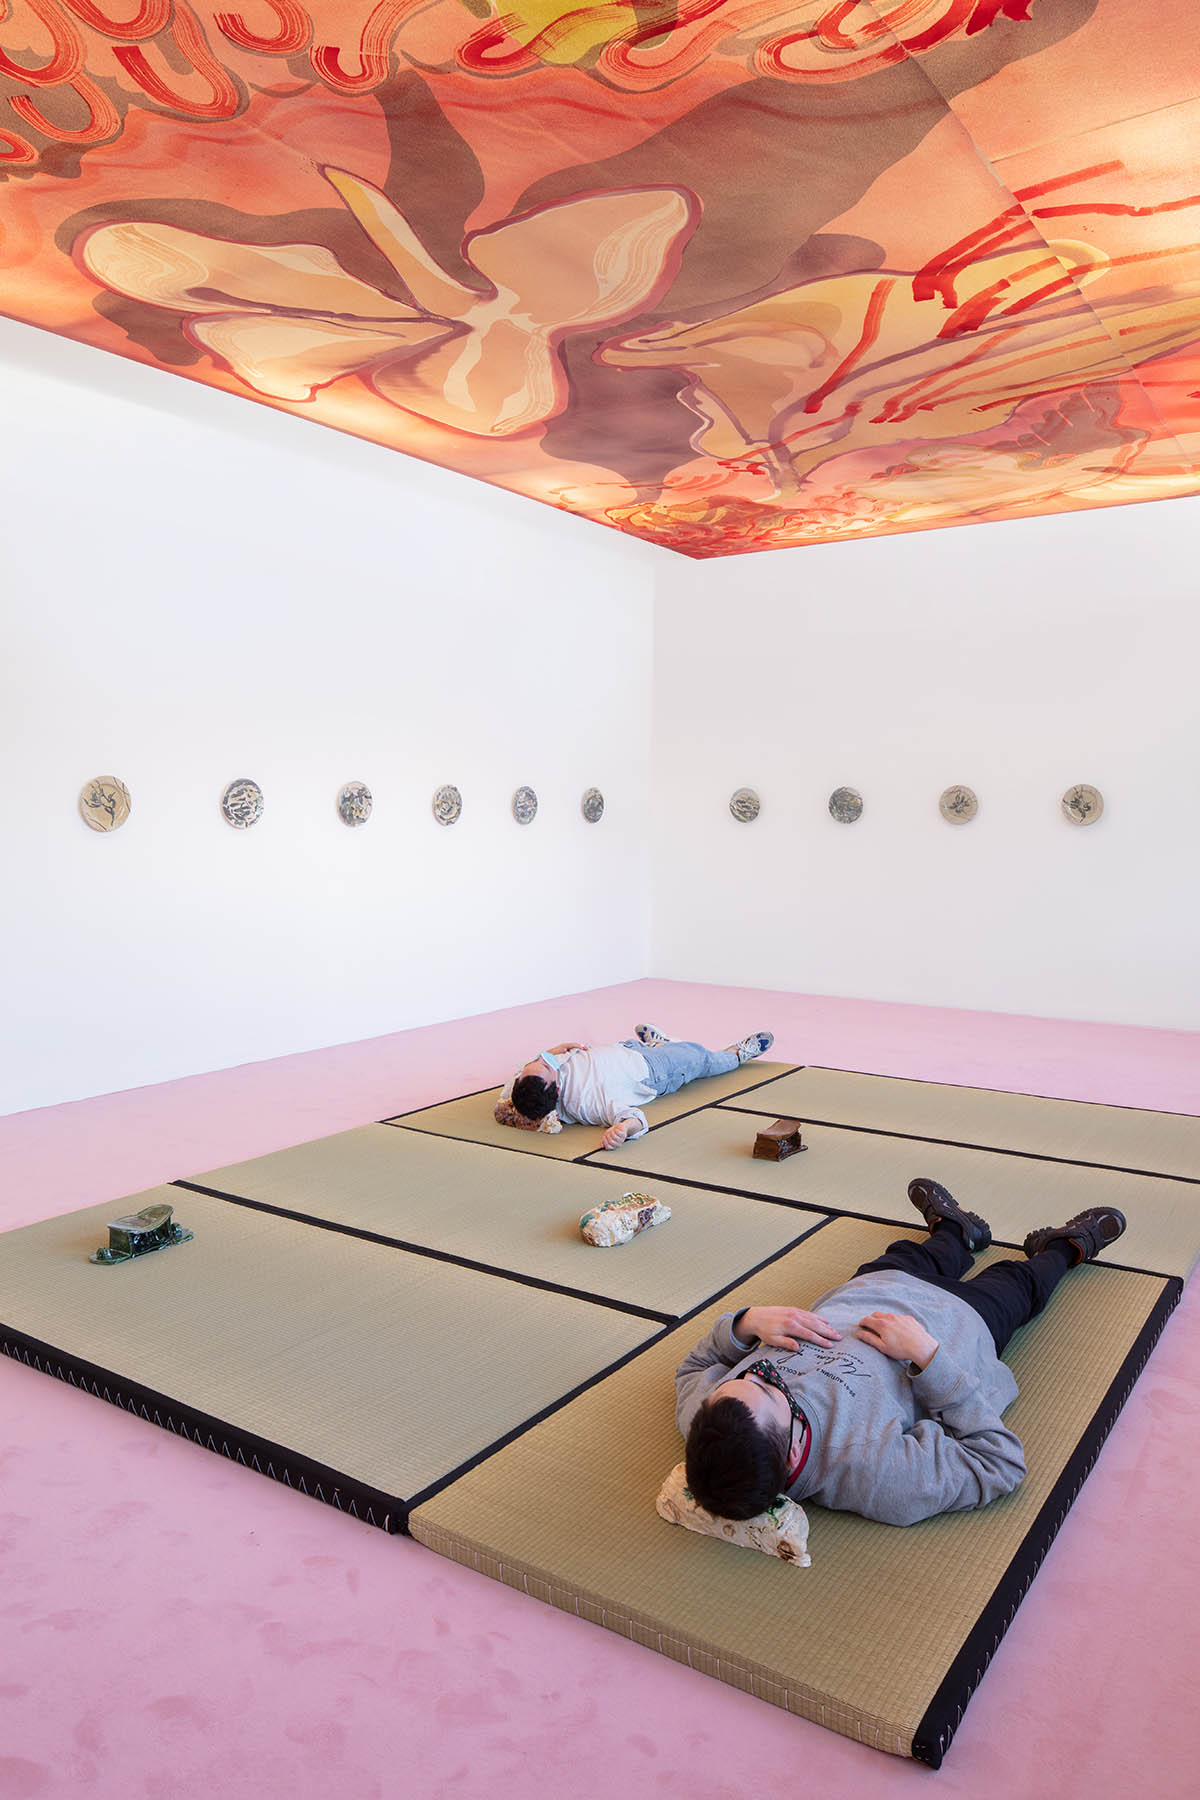 Installation view: Matthew Lutz-Kinoy. Window to The Clouds; Salon Berlin, Museum Frieder Burda Matthew Lutz-Kinoy, Wings of Flamingos, Camargue, 2020. Acrylic on canvas, 380 × 690 cm. Courtesy of the artist; Keramikos 3, 2019. Hand-painted set of 20 glazed ceramic plates. Courtesy of the artist and Mendes Wood DM São Paulo, New York and Brussels; Pillow In Cognac With Relaxed Figure, 2018; Pillow In The Form Of Reclining Child With Polkadots, 2018; Pillow In Green With Relaxing Figure, 2018; Pillow In The Form Of Reclining Child With Landscape, 2018; Pillow In The Form Of Reclining Child, Fishing Net, 2018. Glazed ceramics, dimensions variable. Courtesy of the artist and Fitzpatrick Gallery; Photo: Thomas Bruns